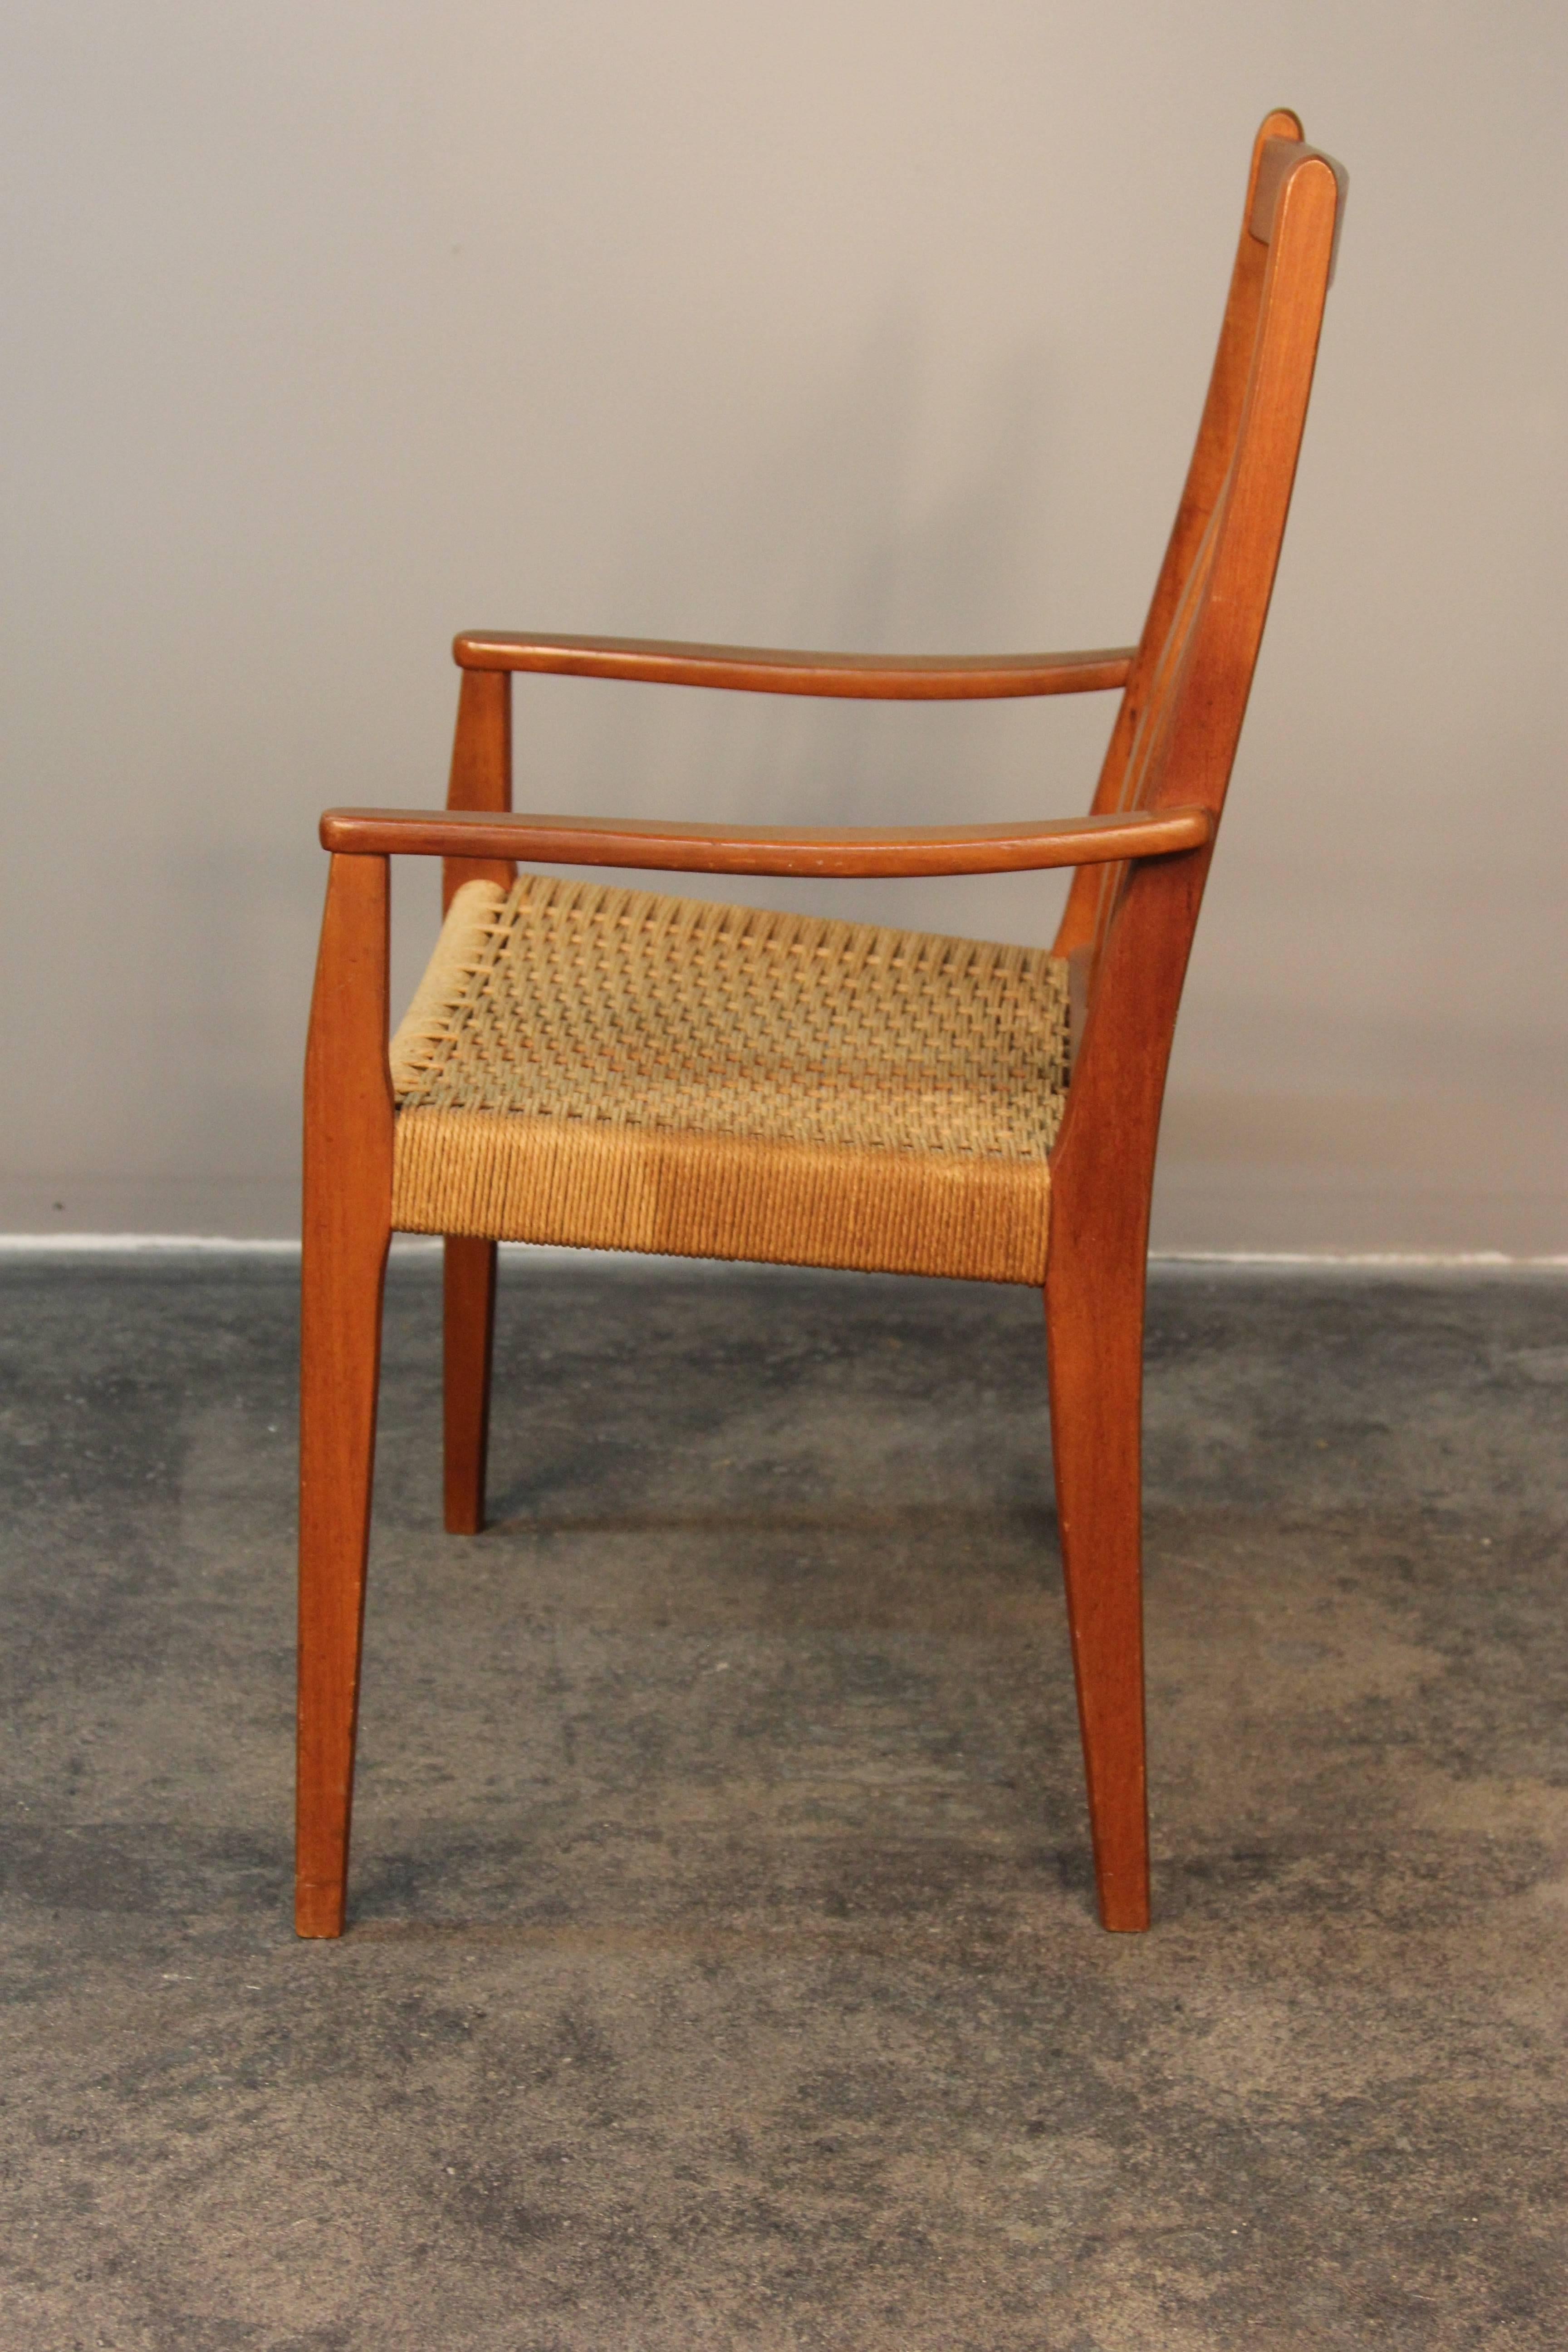 Pair of Danish Teak High Back Armchairs with Danish Cord Seats In Good Condition For Sale In Bridport, CT